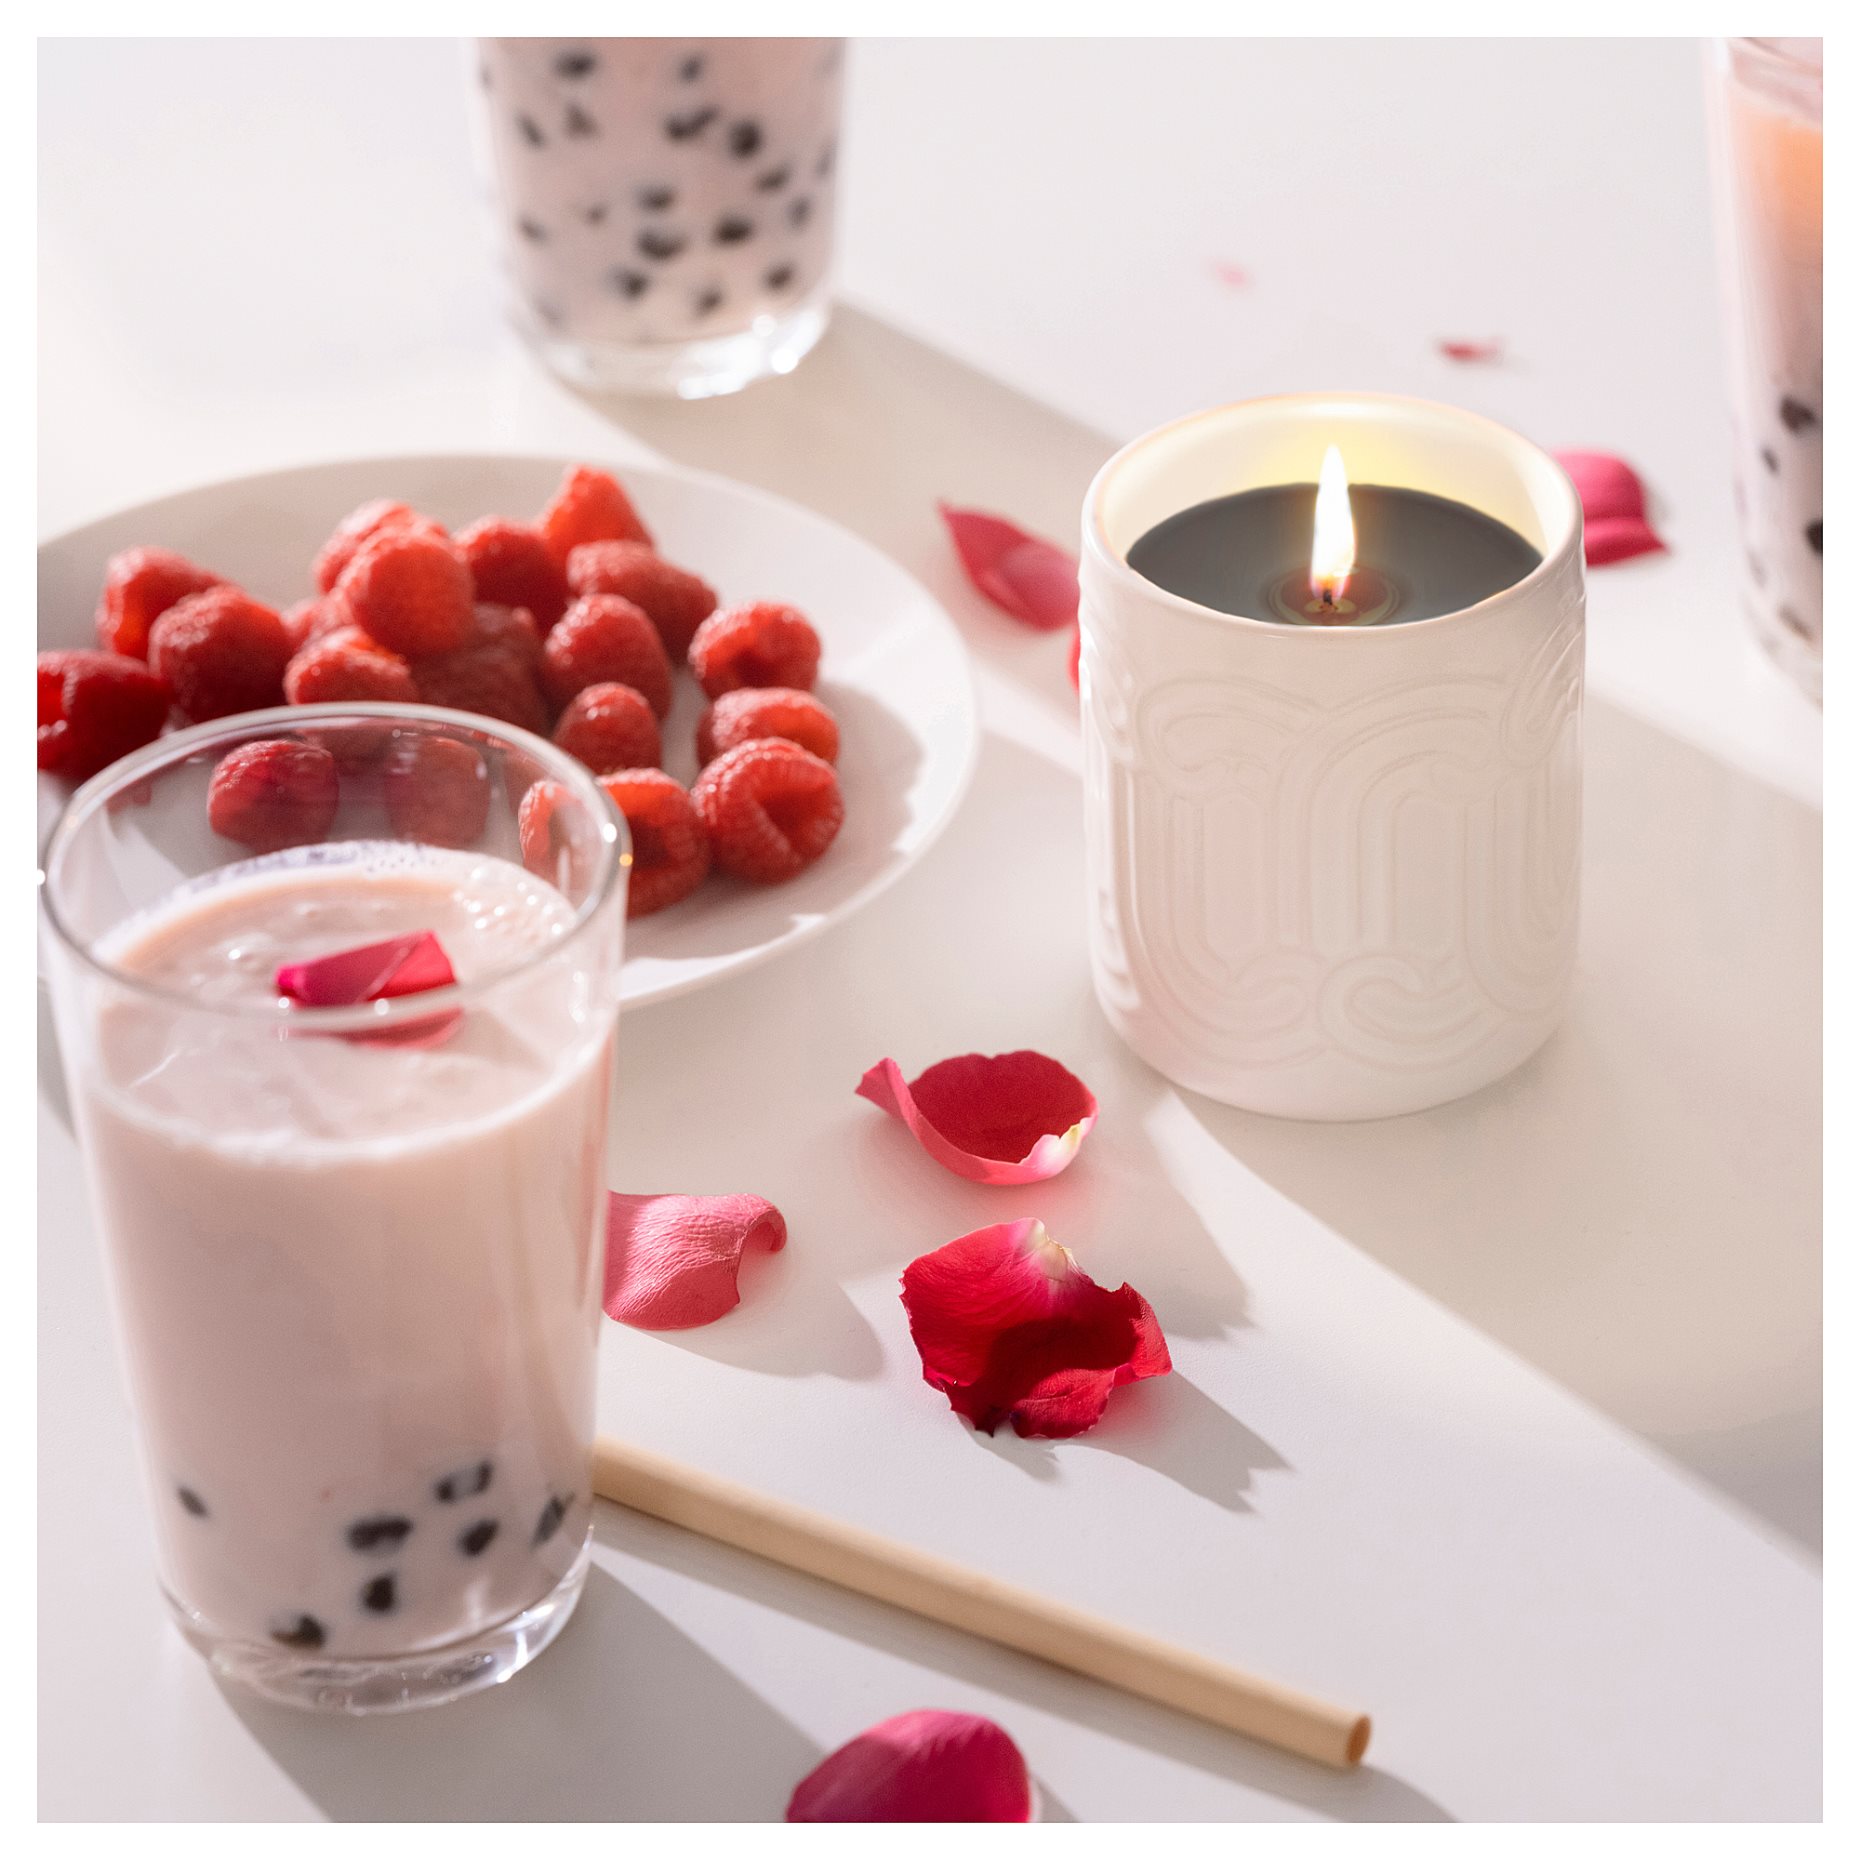 SOTRONN, scented candle in ceramic jar/red berries & vanilla, 45 hr, 805.623.84